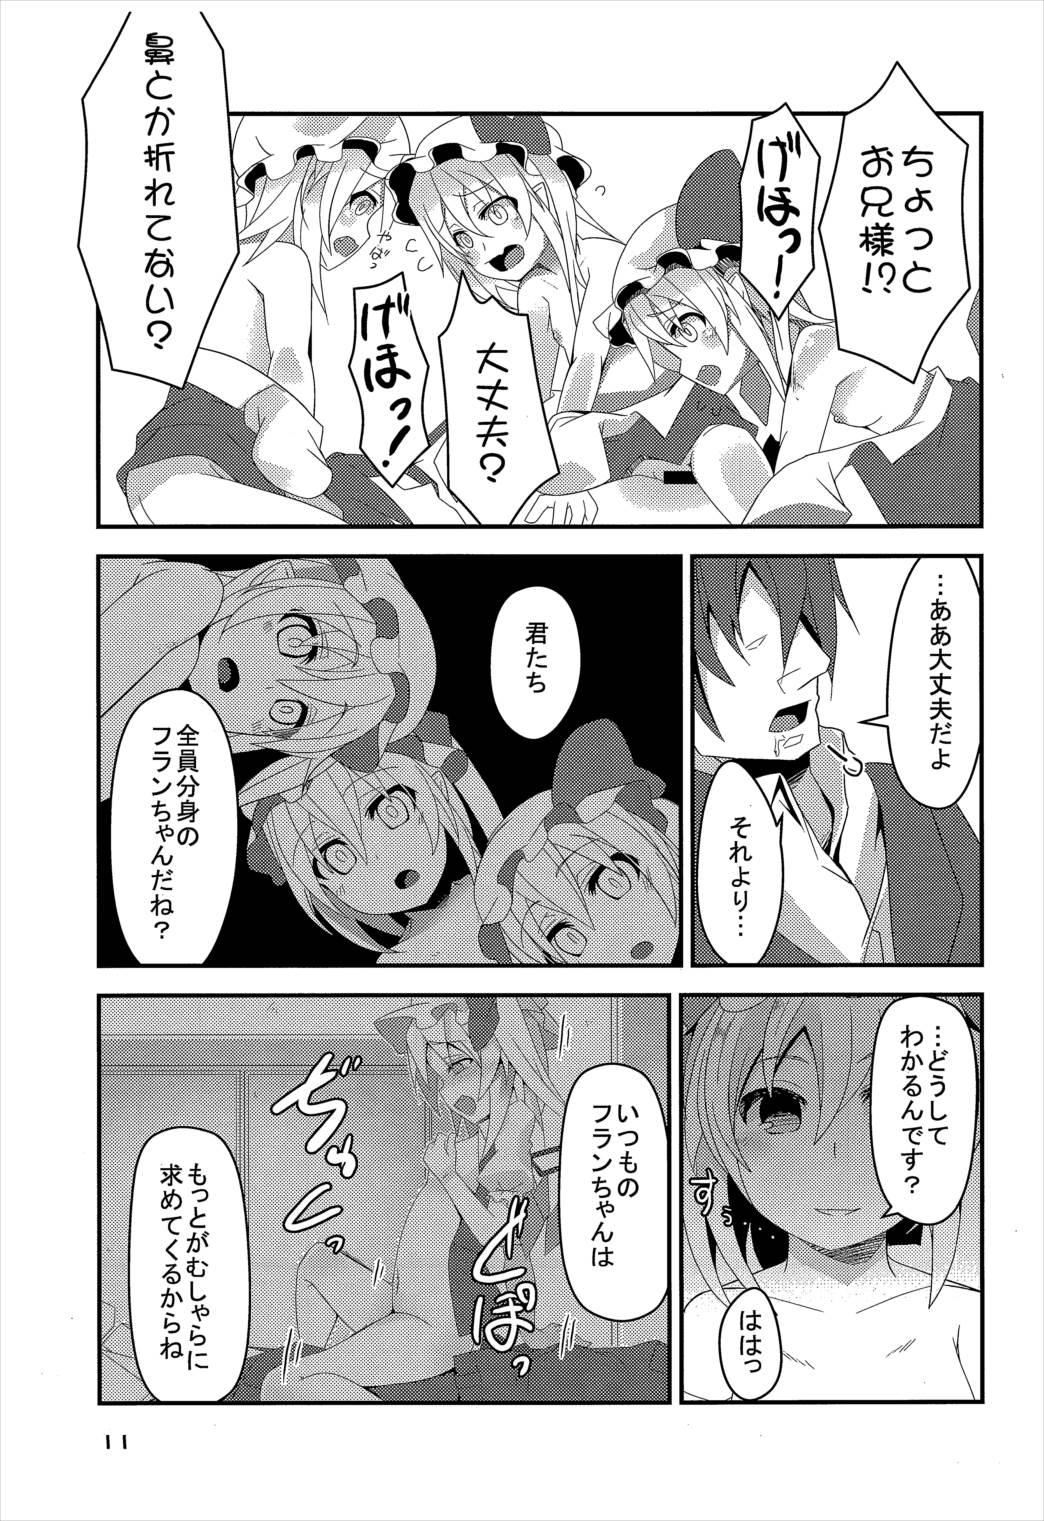 Italiano Four of Flan-chan no Gyakushuu - Touhou project Spooning - Page 10